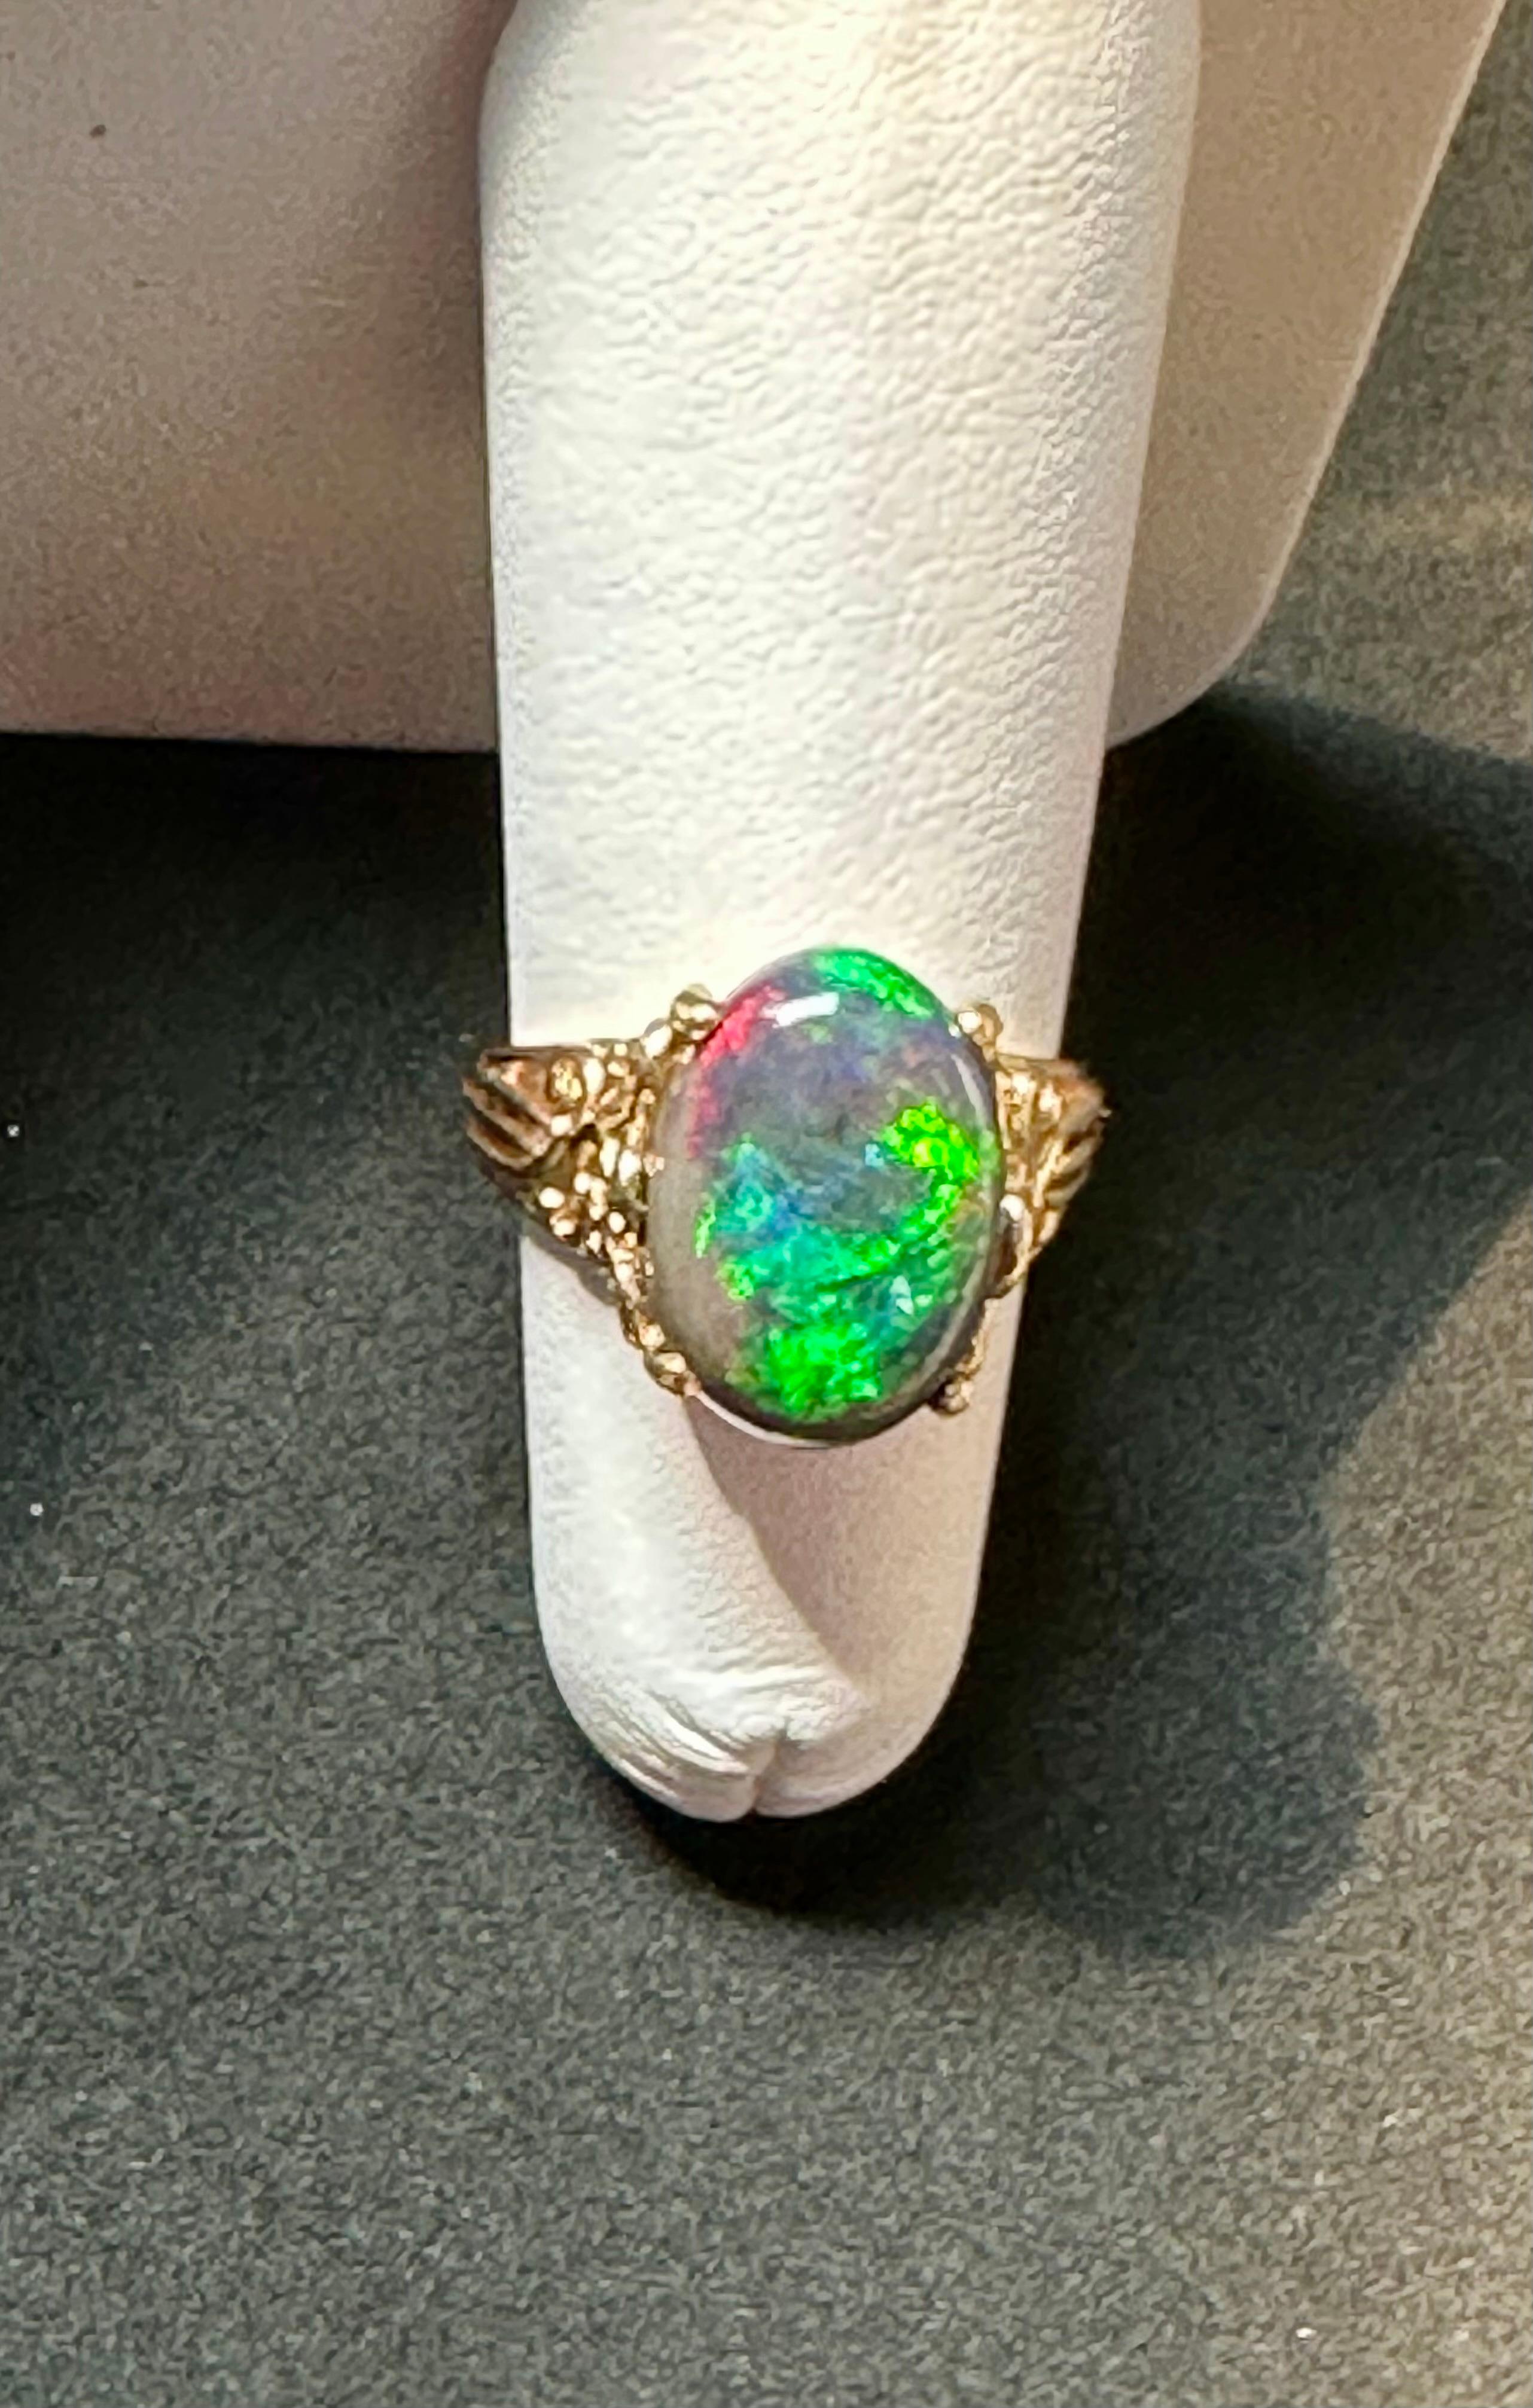 Introducing our captivating 14 Karat Yellow Gold Cocktail Ring featuring a breathtaking 3 carat oval-shaped Black Australian Opal. This remarkable piece showcases the opal's mesmerizing shades of green and blue, radiating with a brilliant luster and